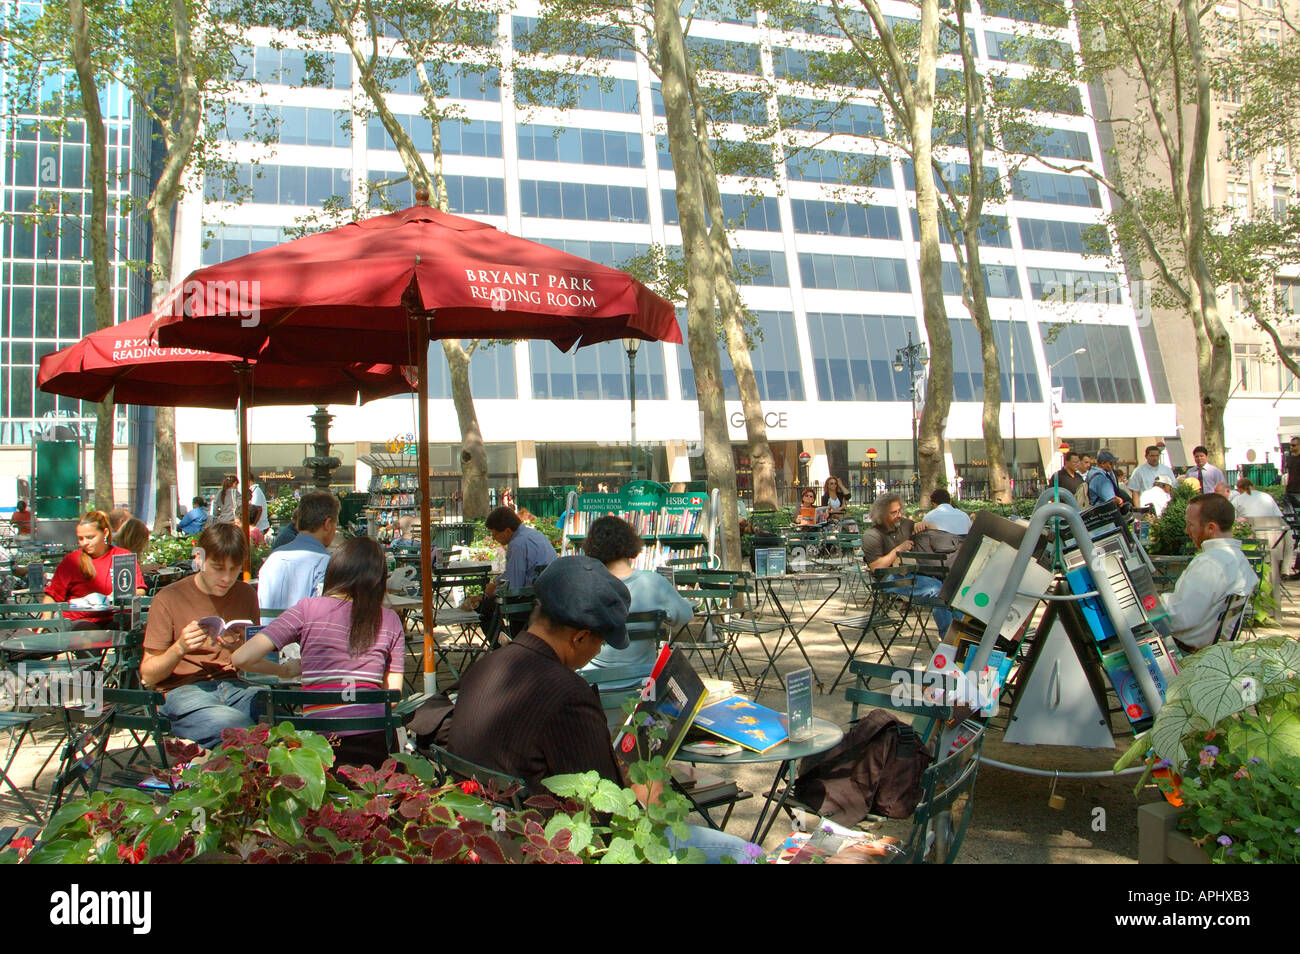 People relaxing in Bryant Park reading room, New York, NYC Stock Photo